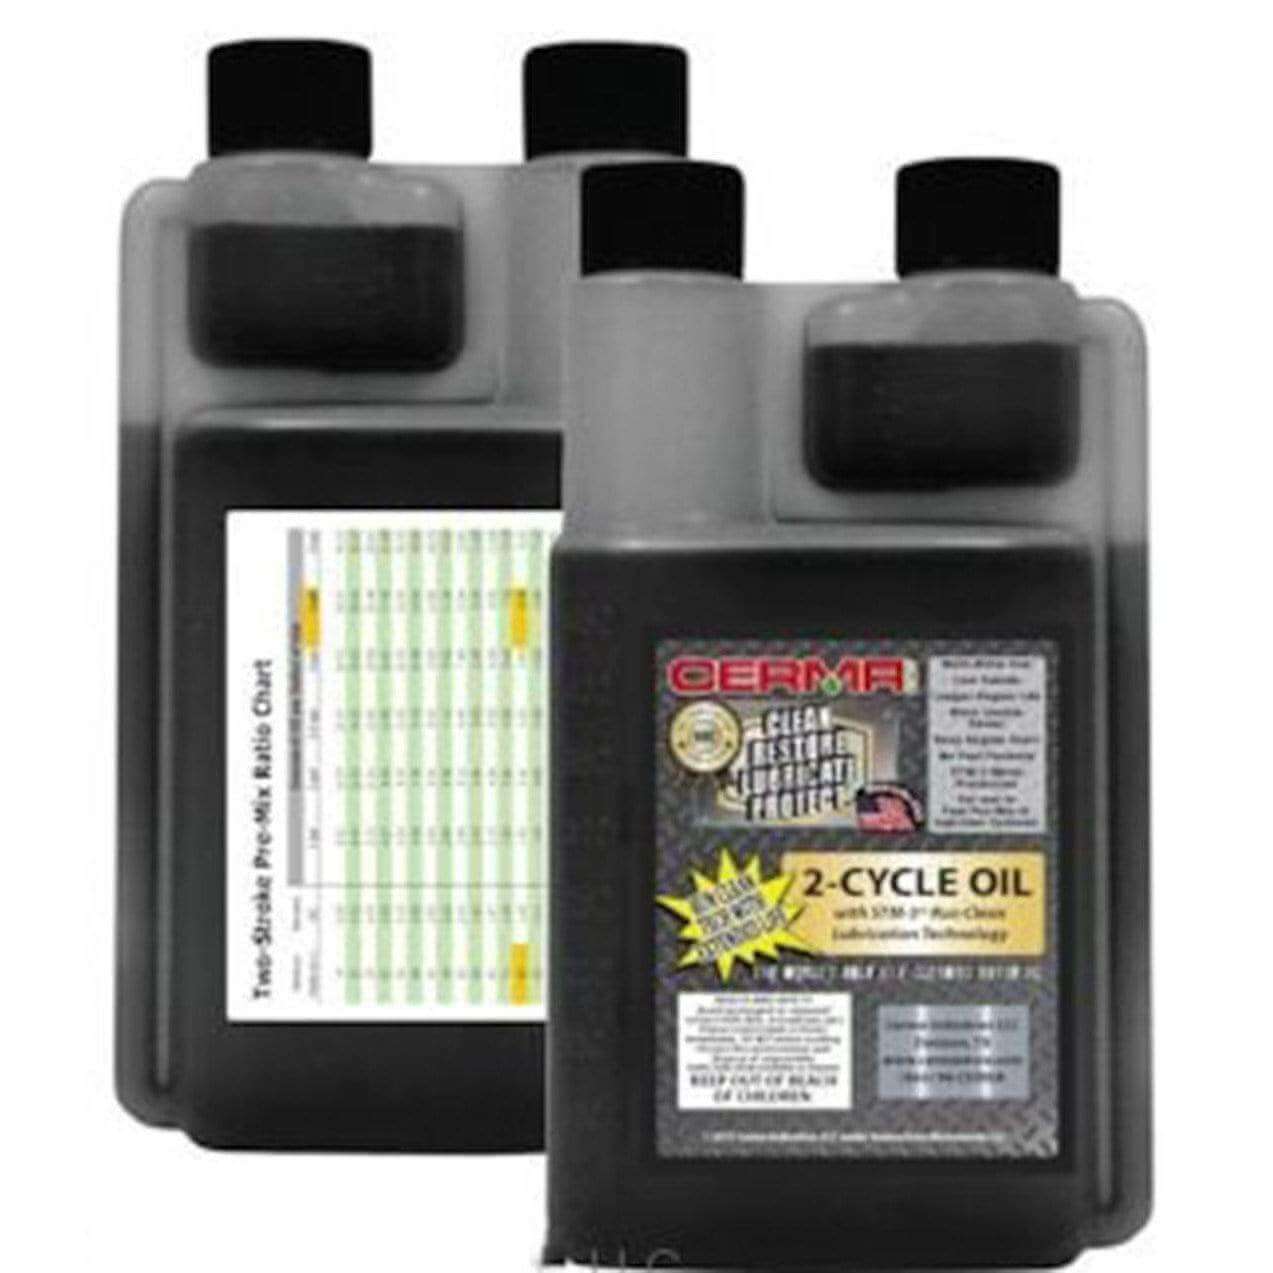 Cermax Ceramic 2-Cycle Multi-Ratio Oil at $21.56 only from cermatreatment.com